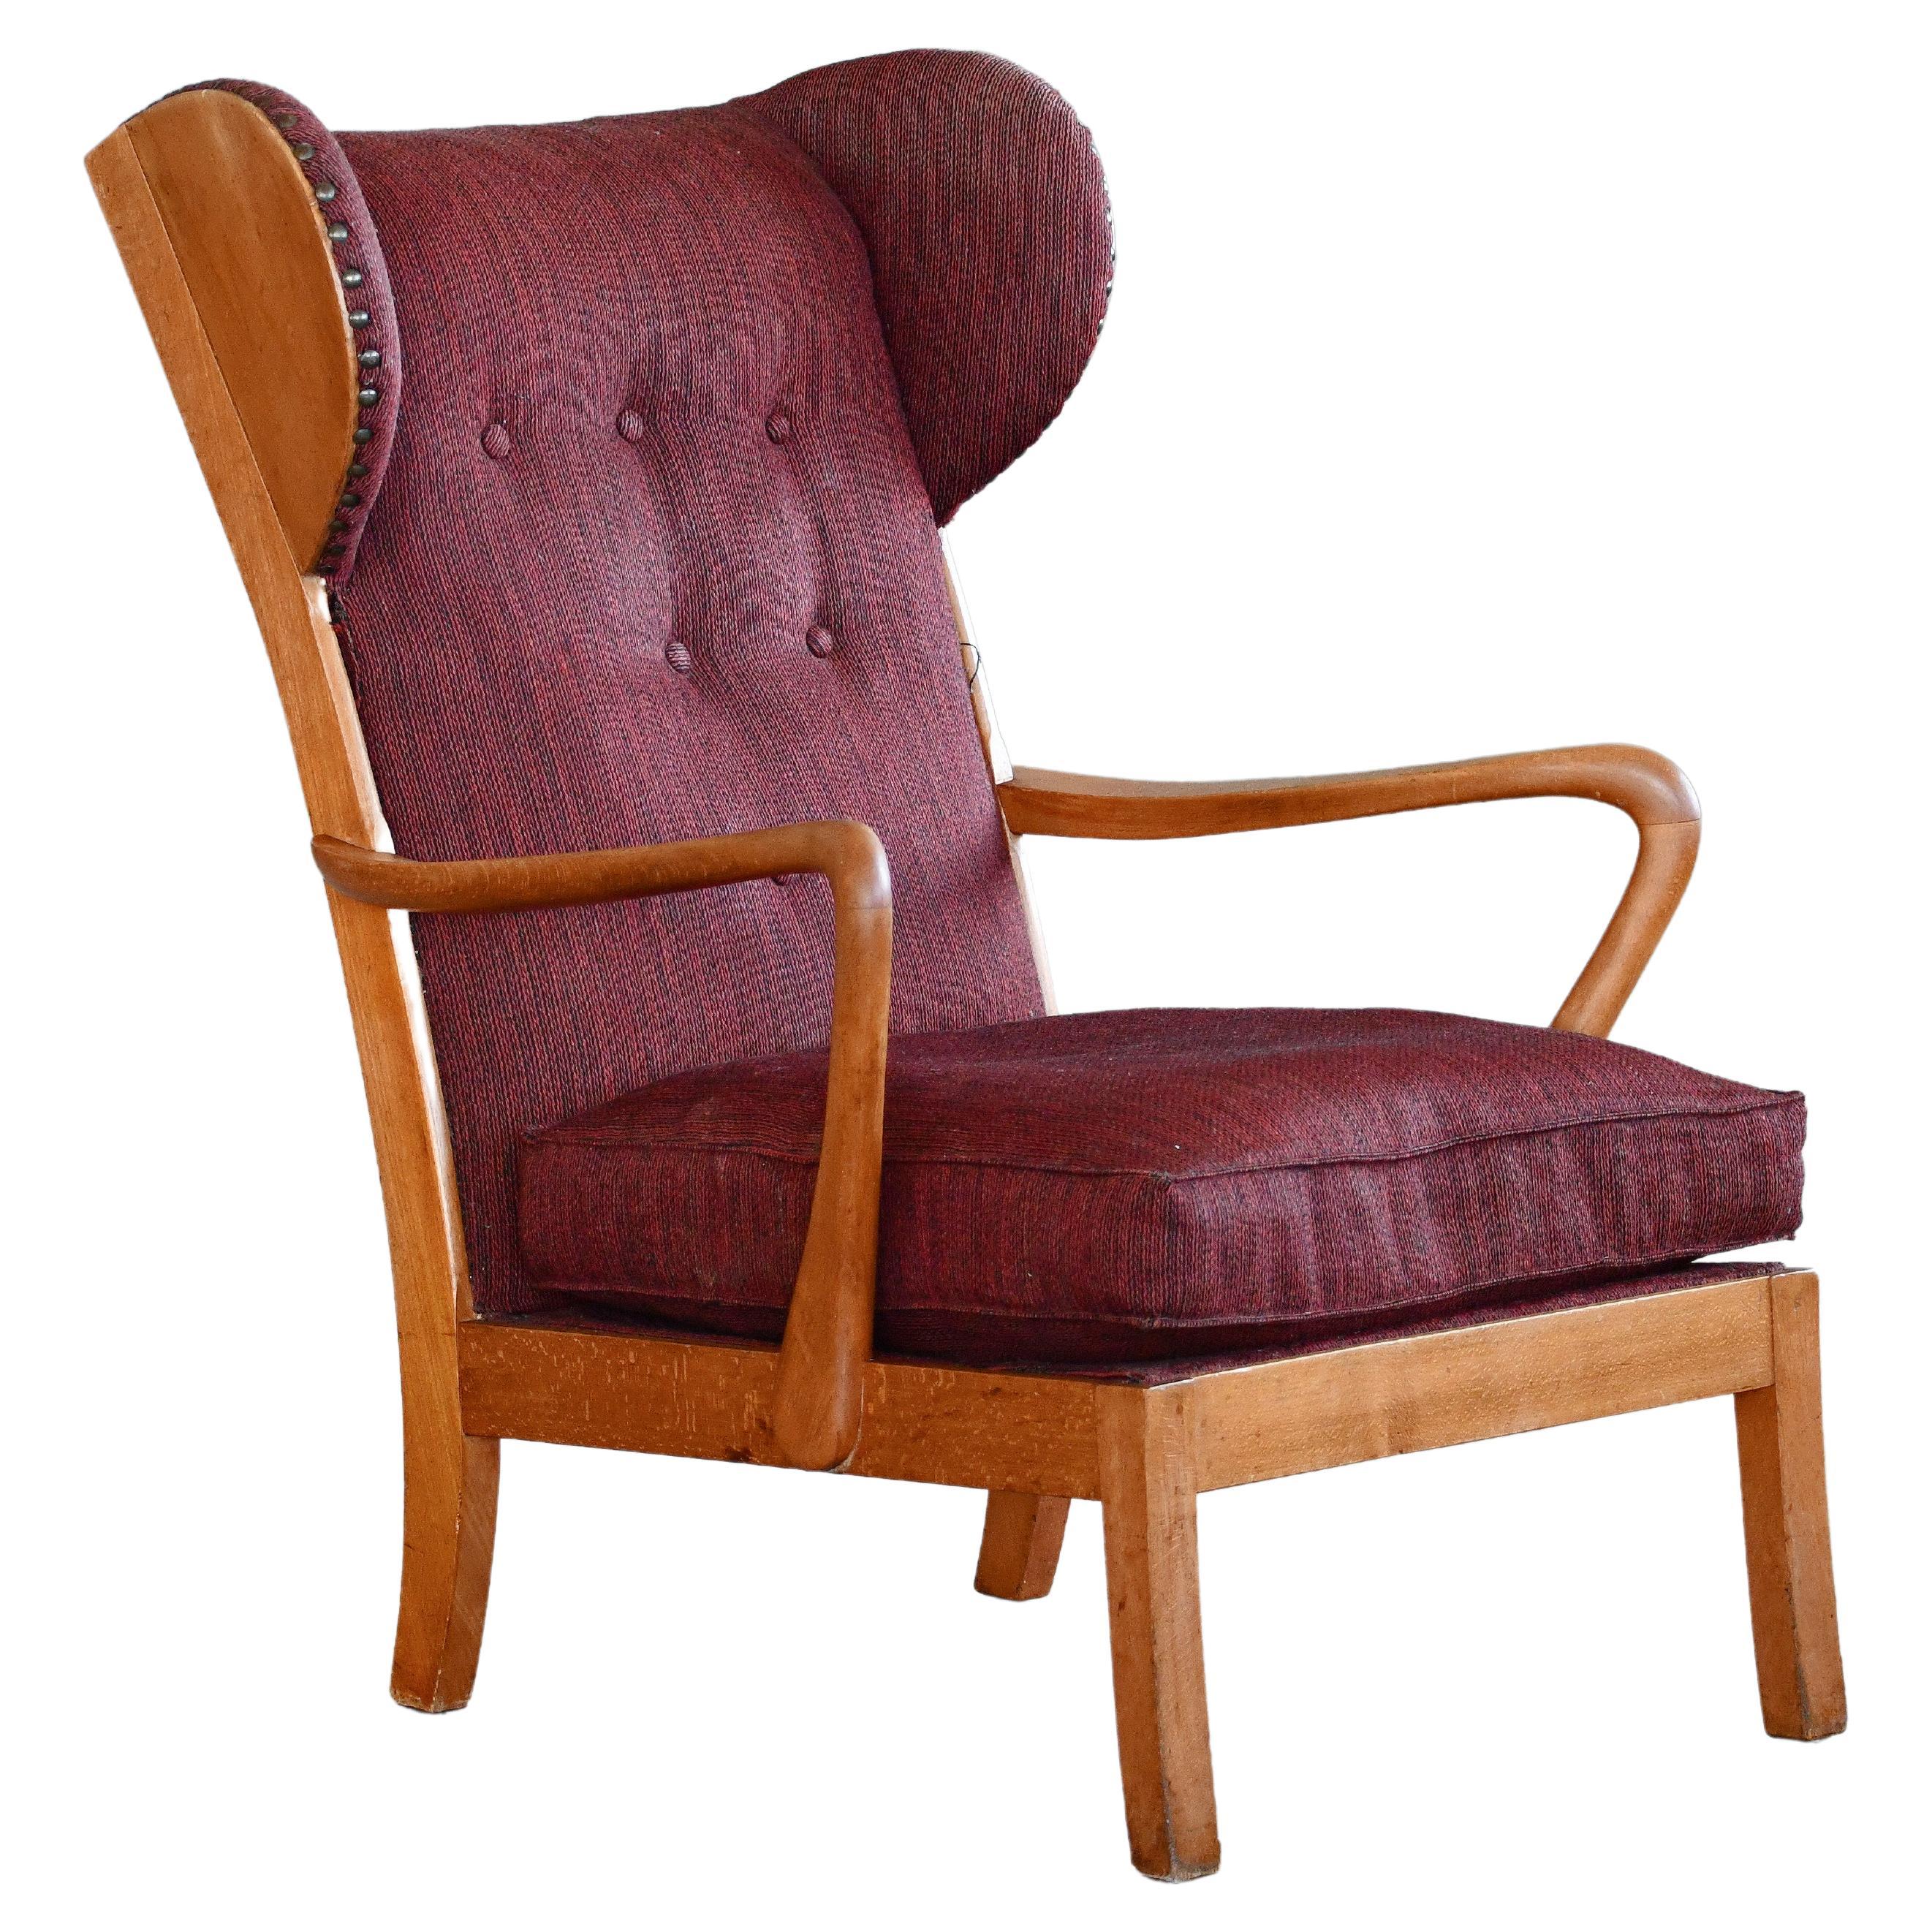 Danish Modern 1950s Highback Lounge Wing Chair With Wooden Wings